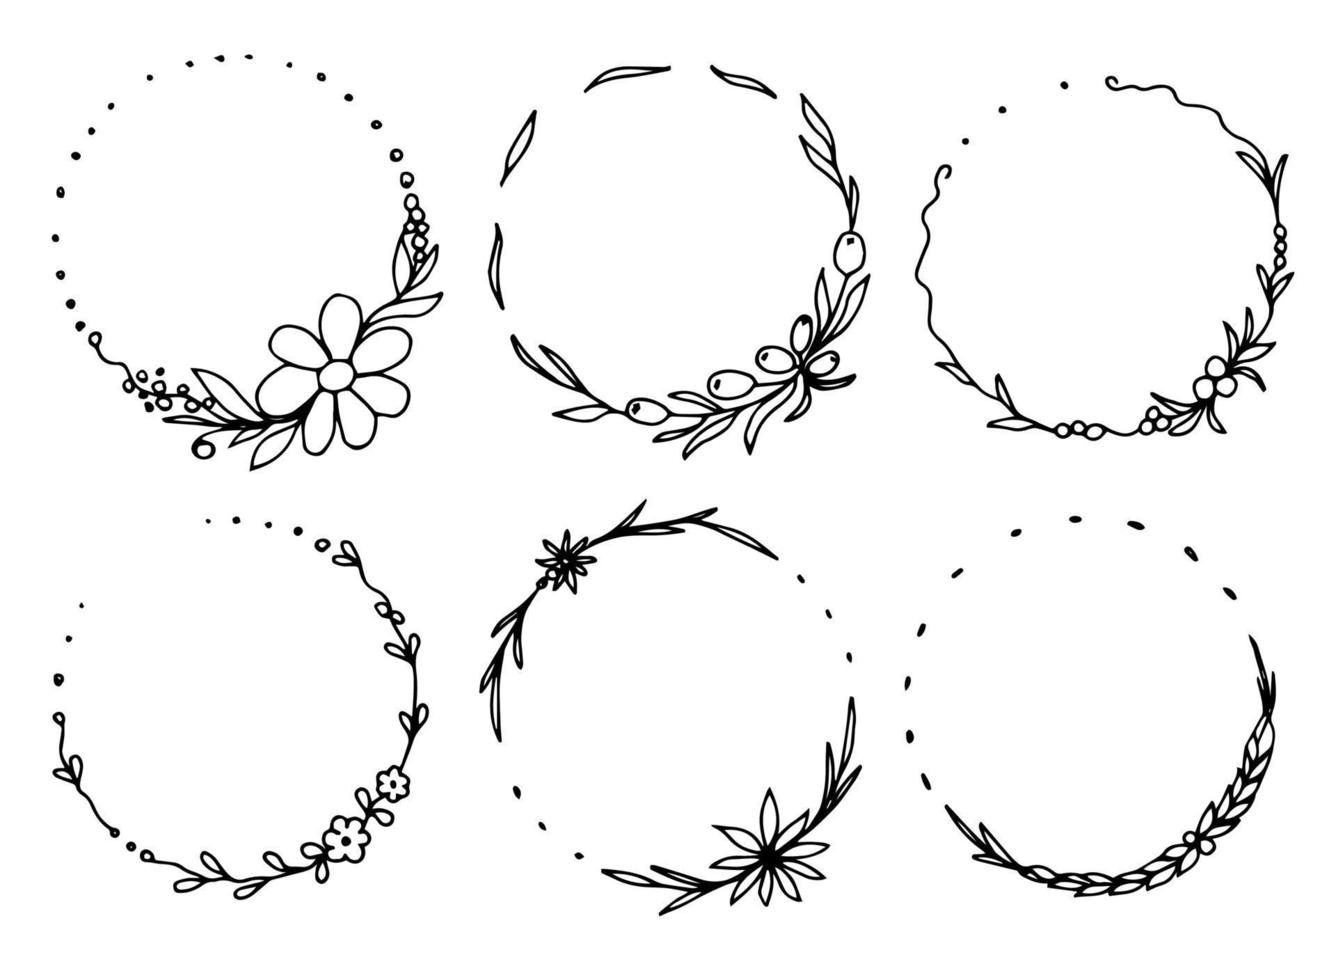 Beautiful patterned round floral frame, wreath. Black outline flower, leaves, olive, berries, spikelet. Print label, cosmetics, beauty salon, shop, postcard, invitation. Vector set of ink hand drawing